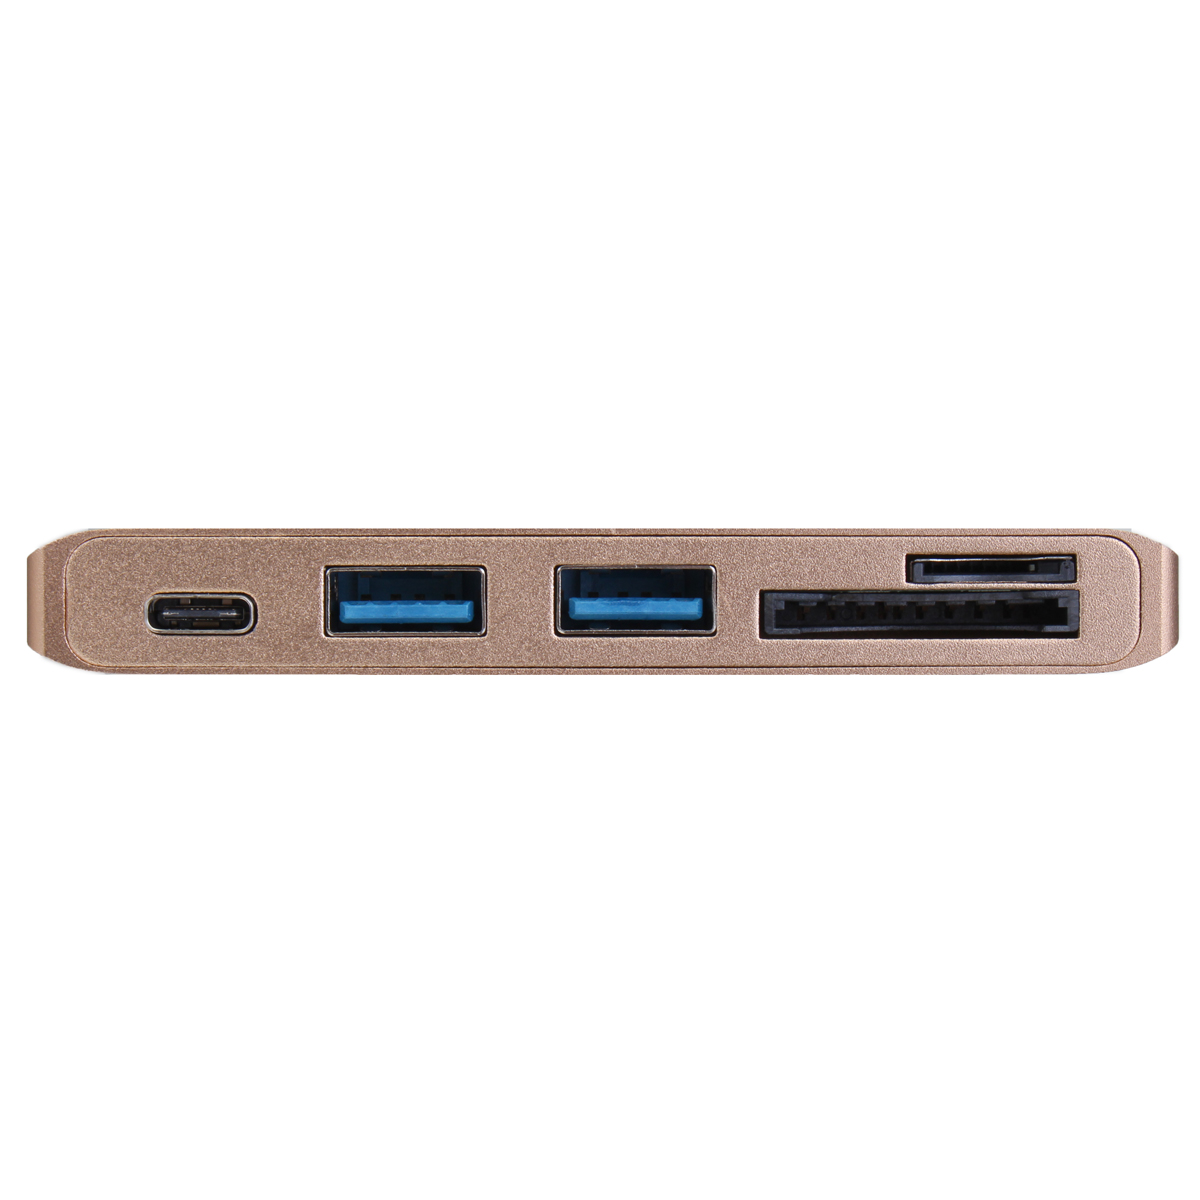 Multifunction-USB-Hub-Type-C-to-Type-C-USB-30-2Ports-TF-SD-Card-Reader-for-Laptop-PC-1153671-6